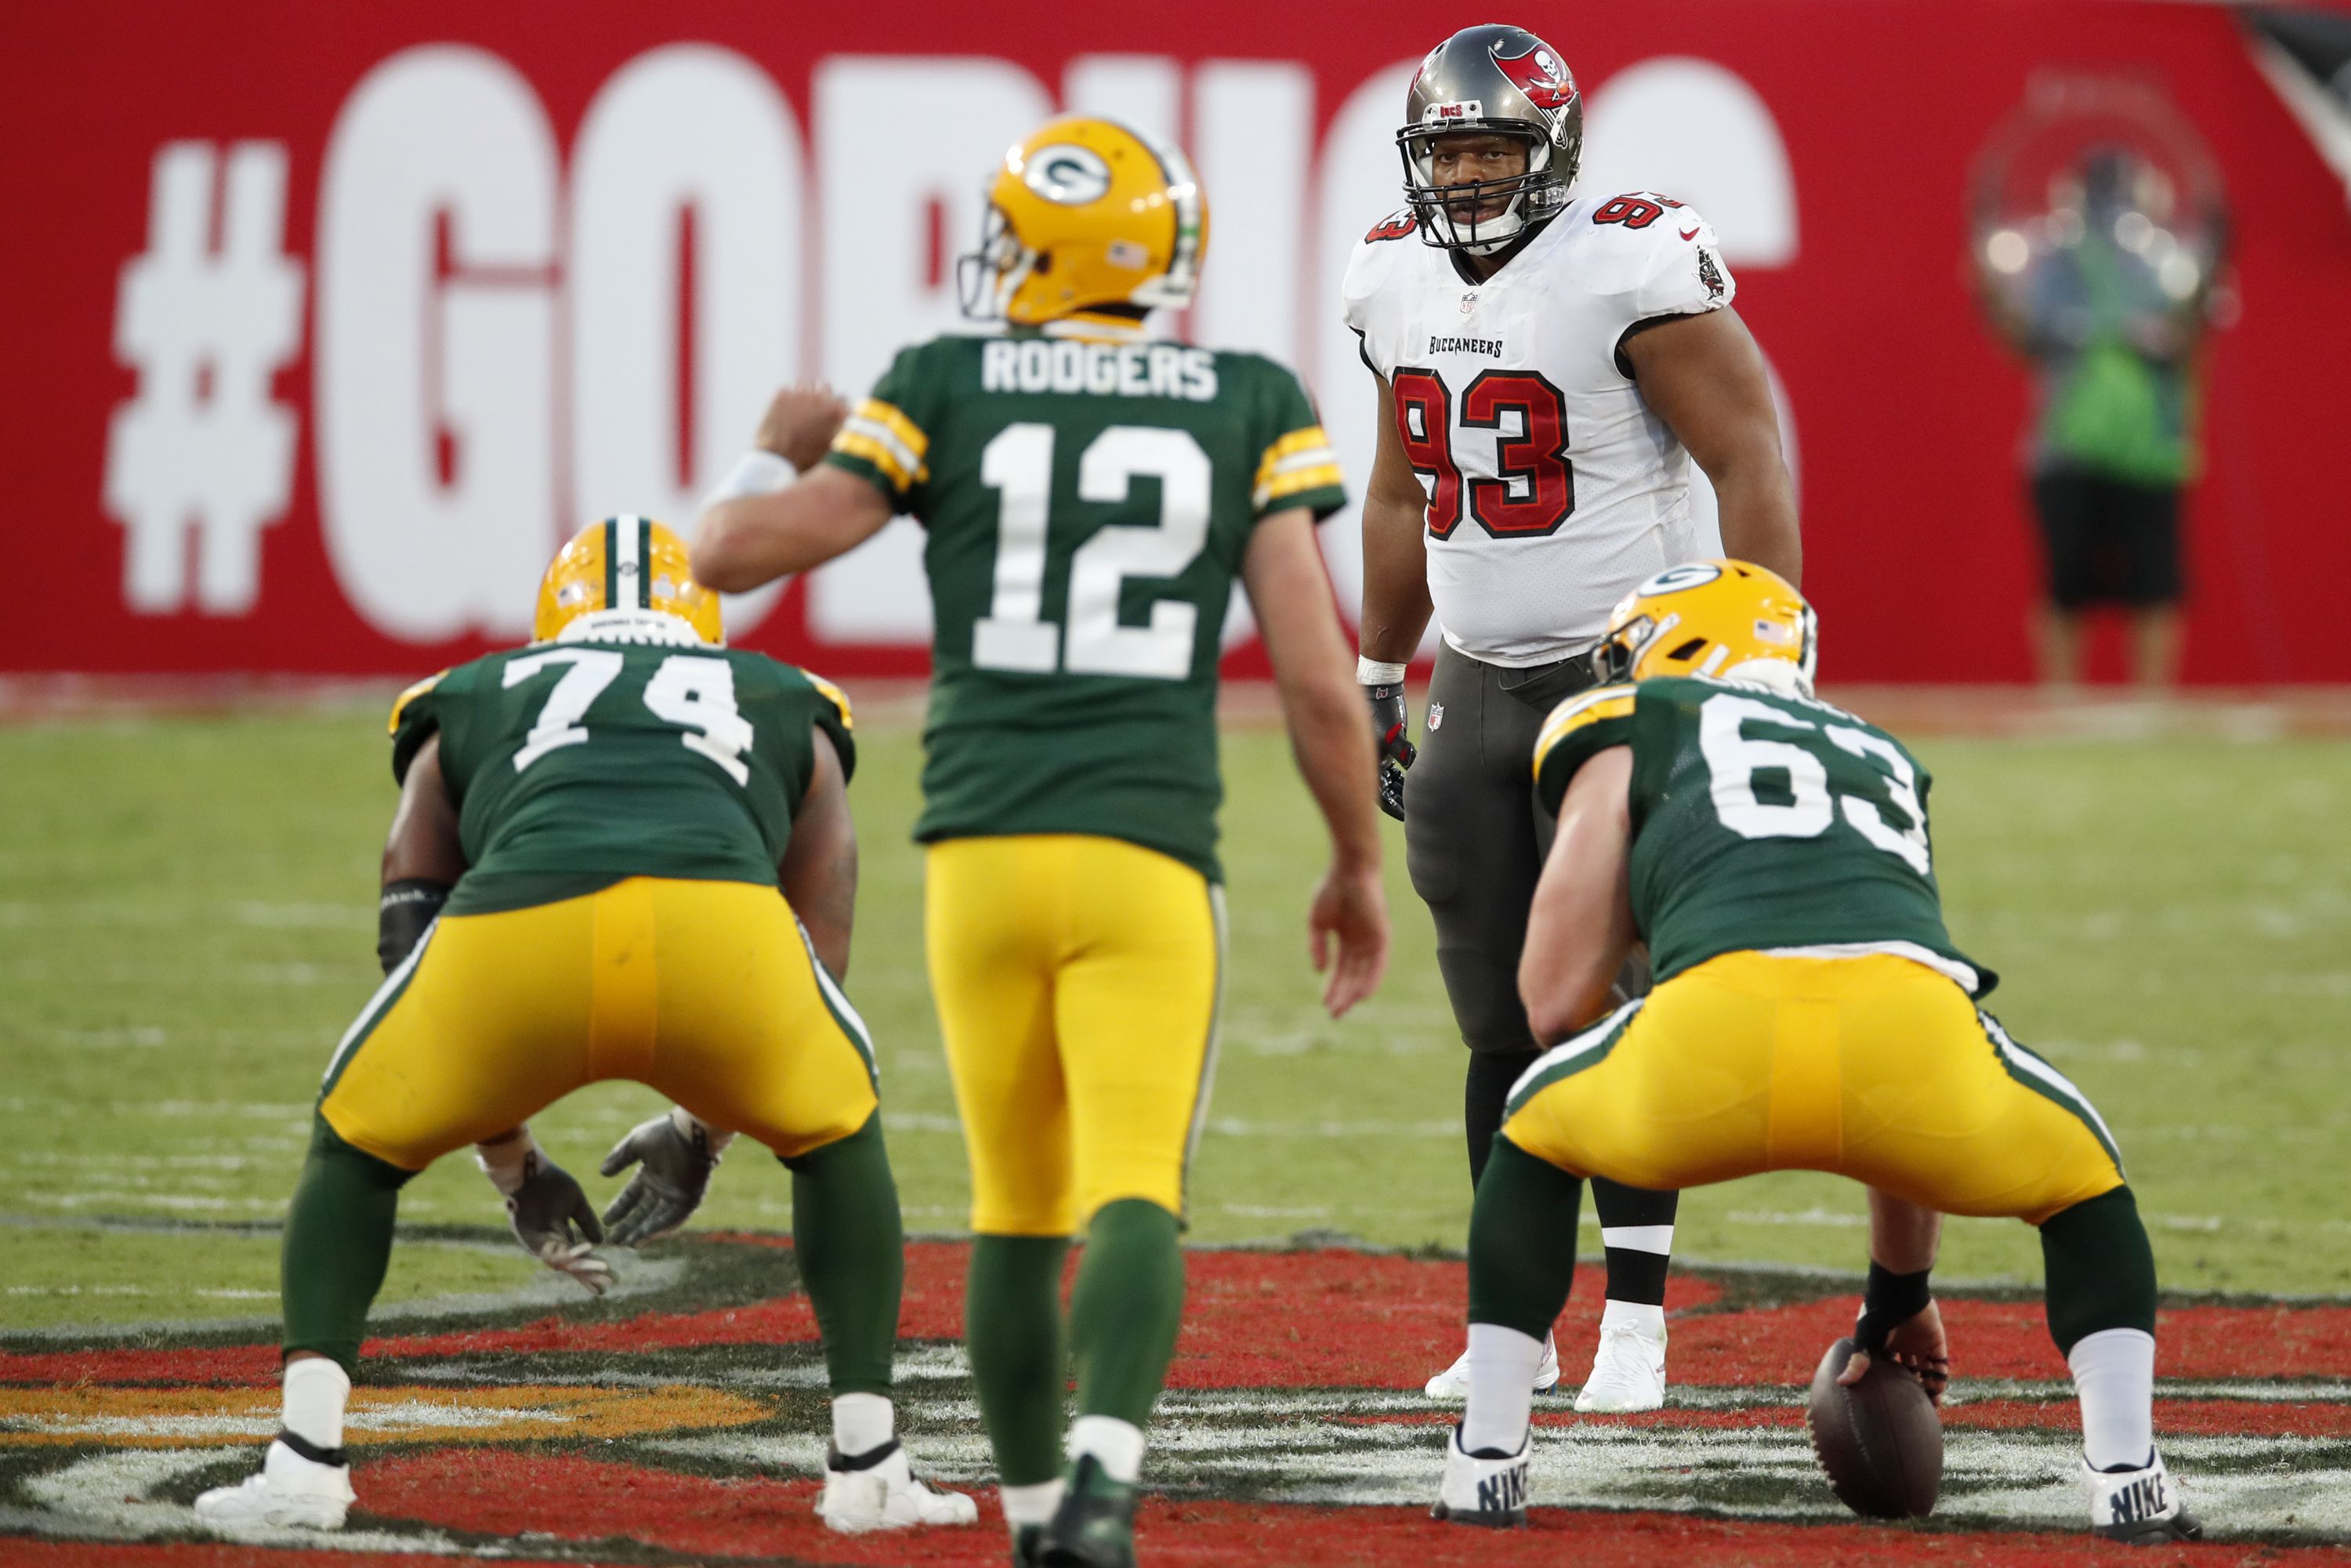 Packers will host Buccaneers in NFC Championship game